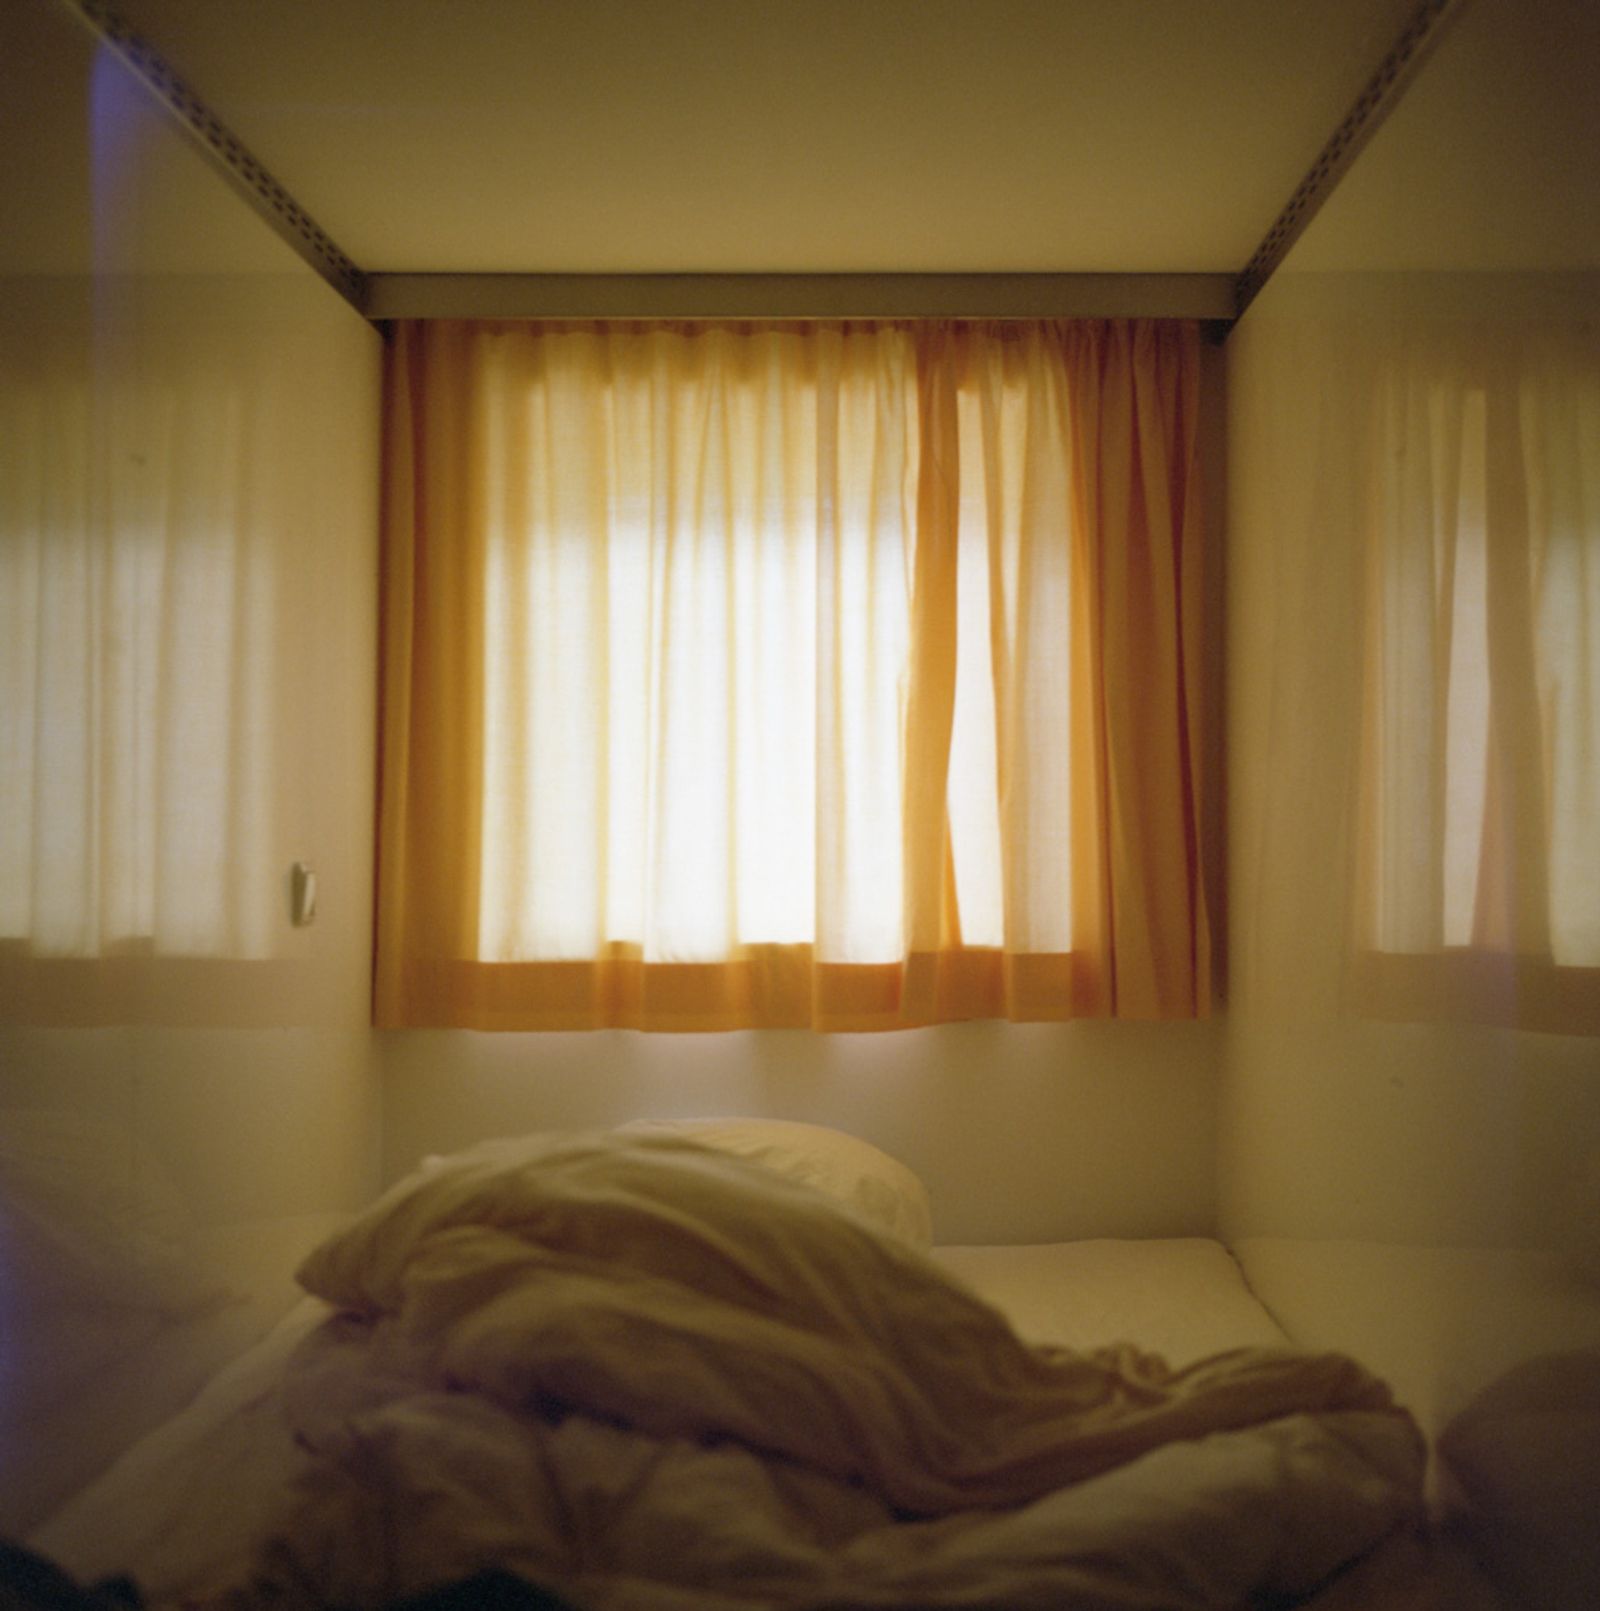 © Chiara Fossati - A room in a youth hostel set up inside a boat in Passau, Germany.